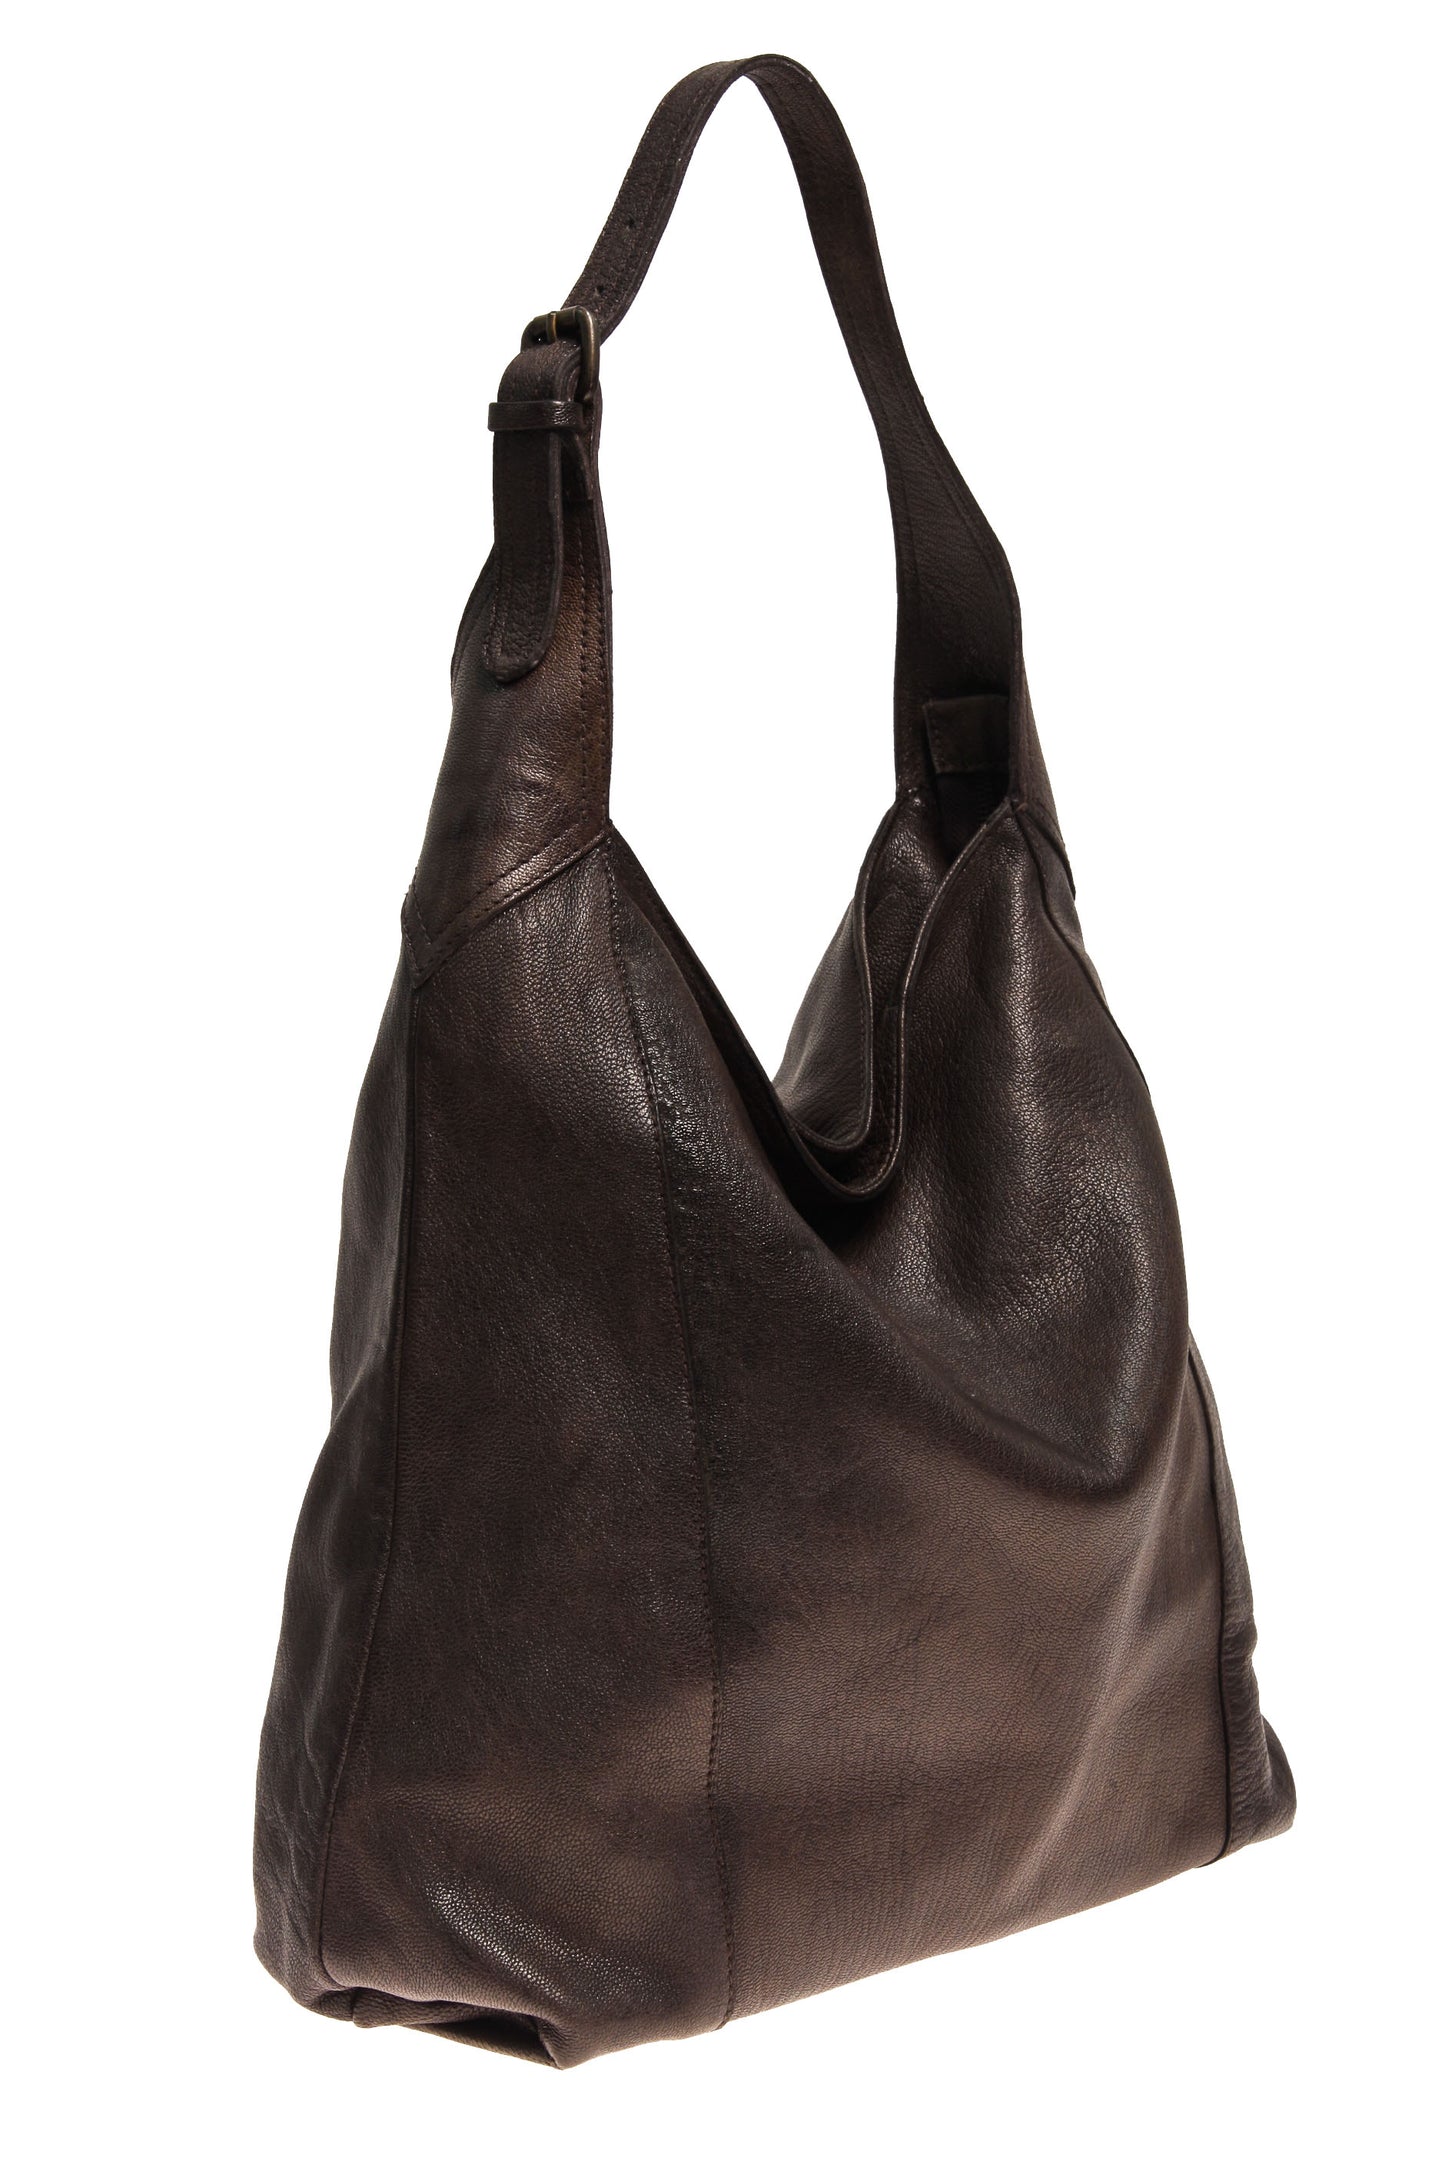 Tano Simple Hobo with Buckle Detail (1324820004948)